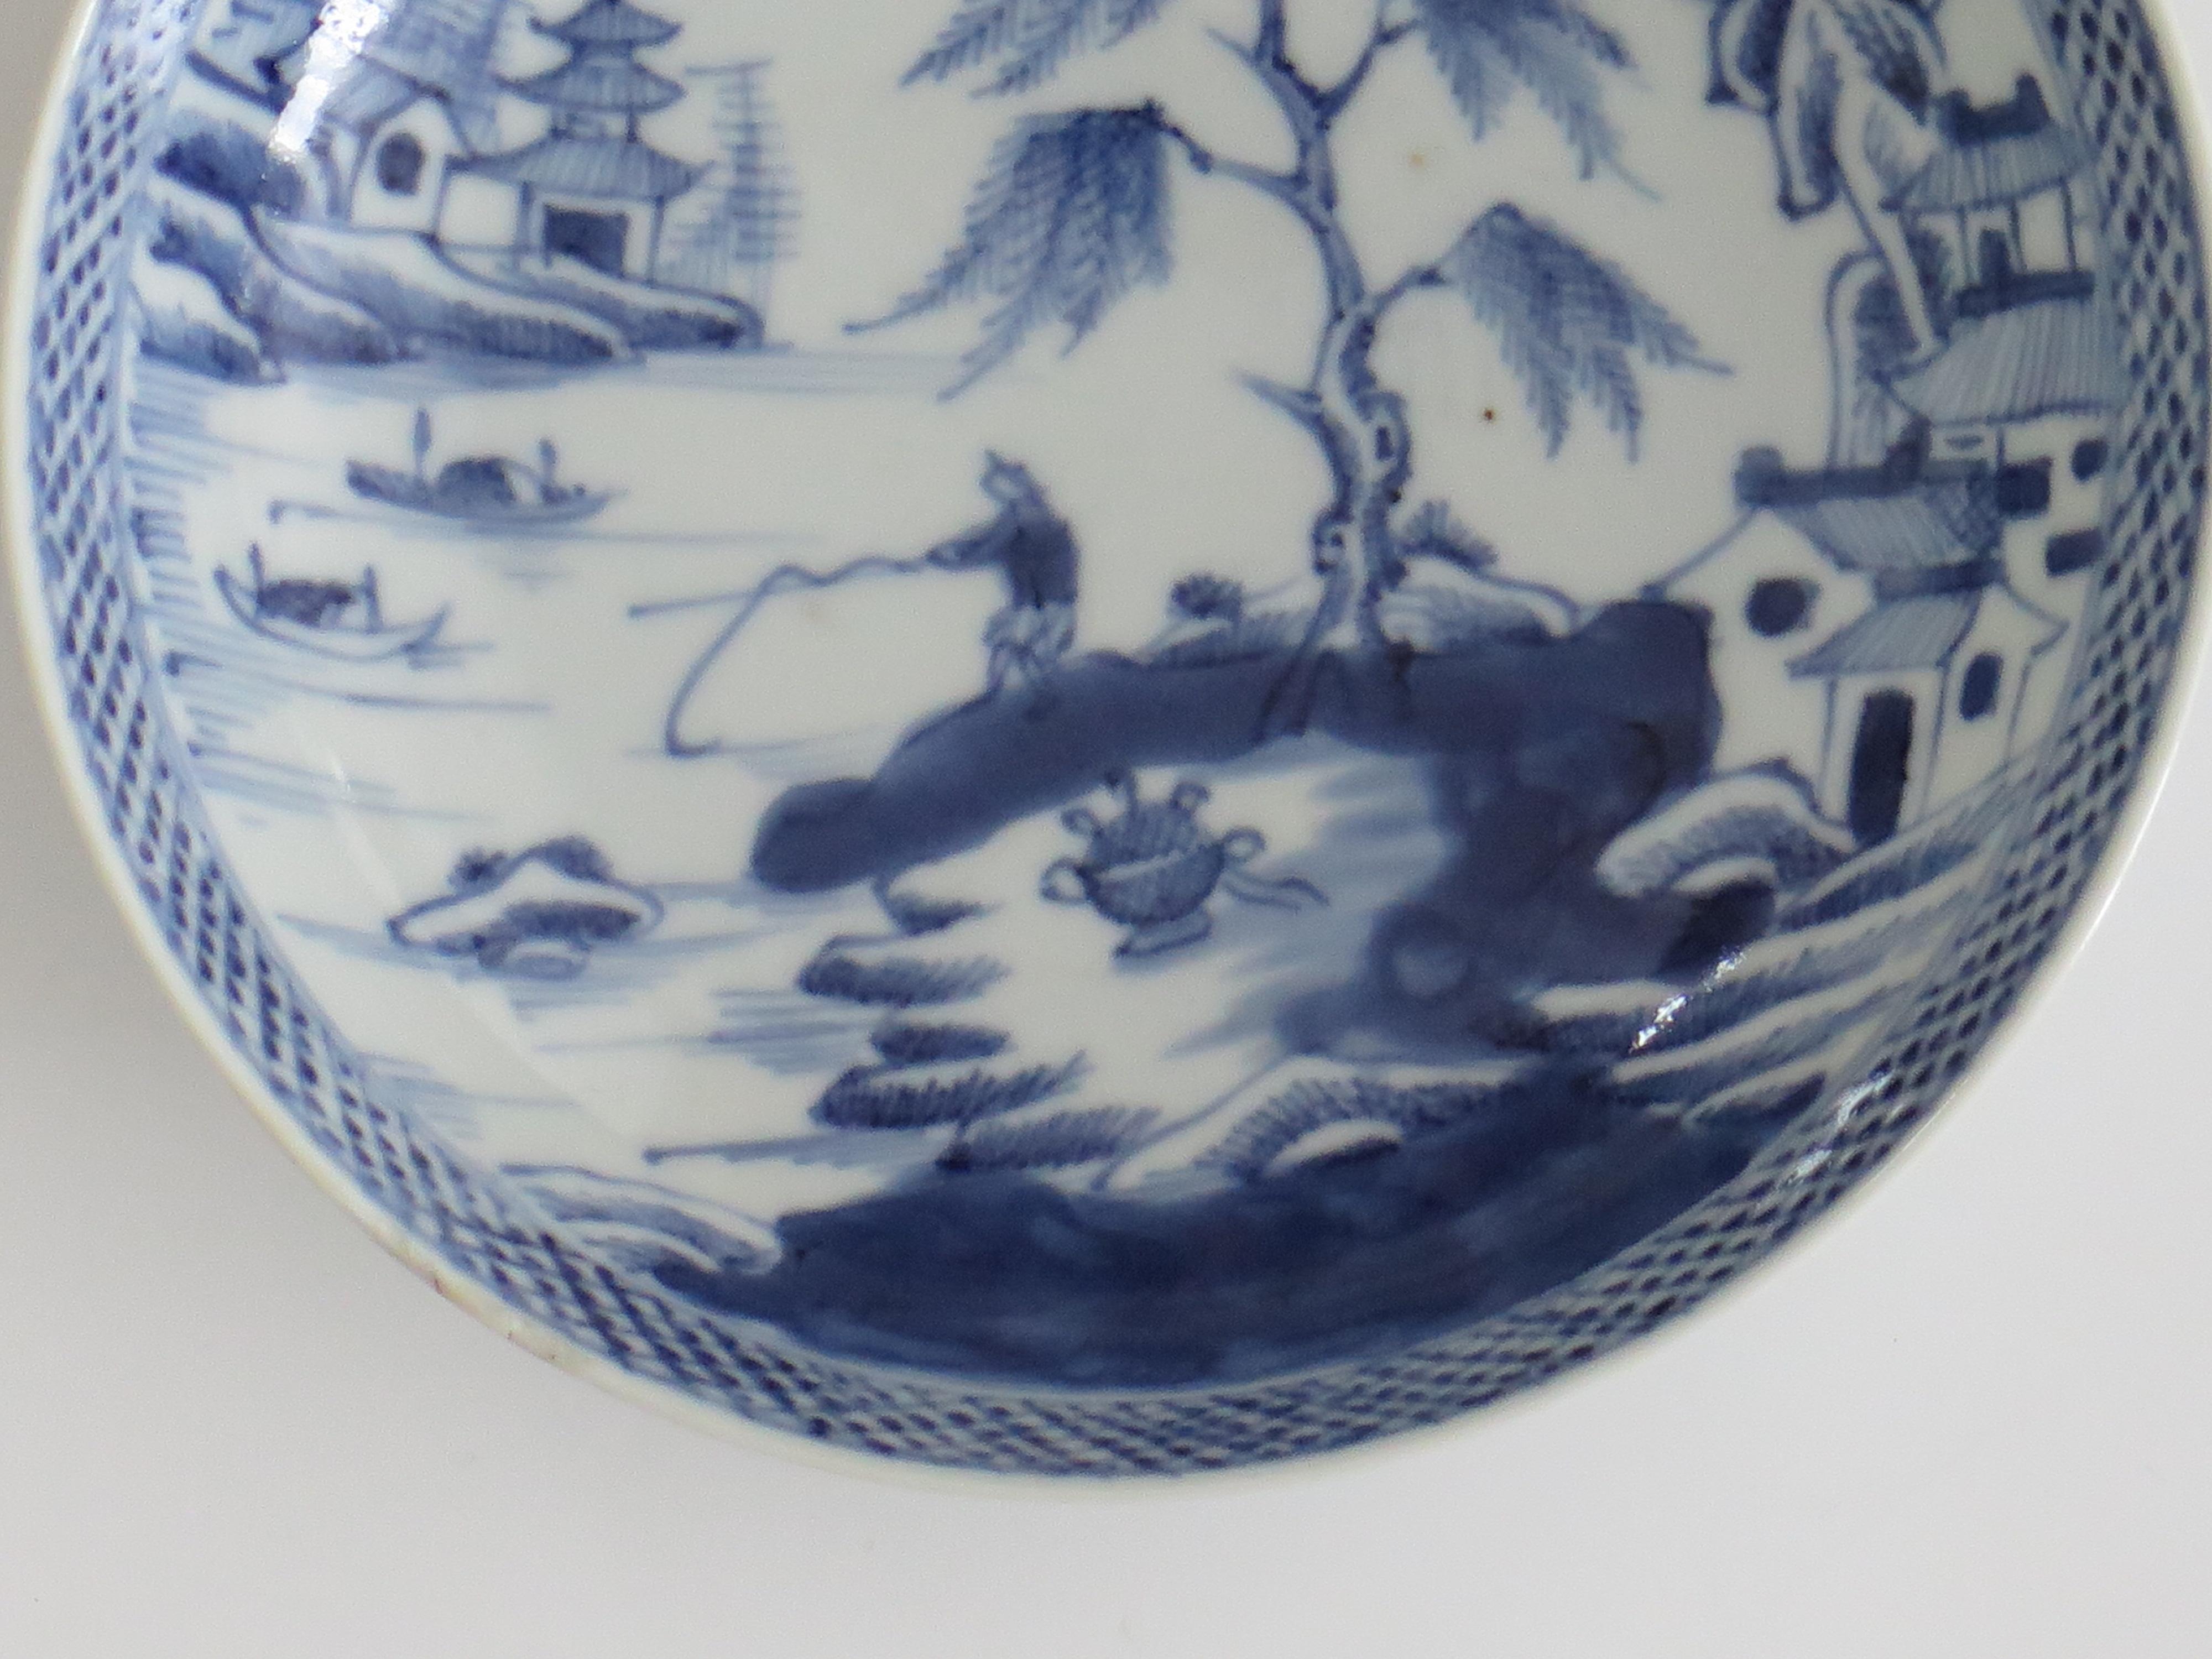 Chinese Export Porcelain Small Berry Bowl or Dish Blue & White, Late 18th C Qing 1